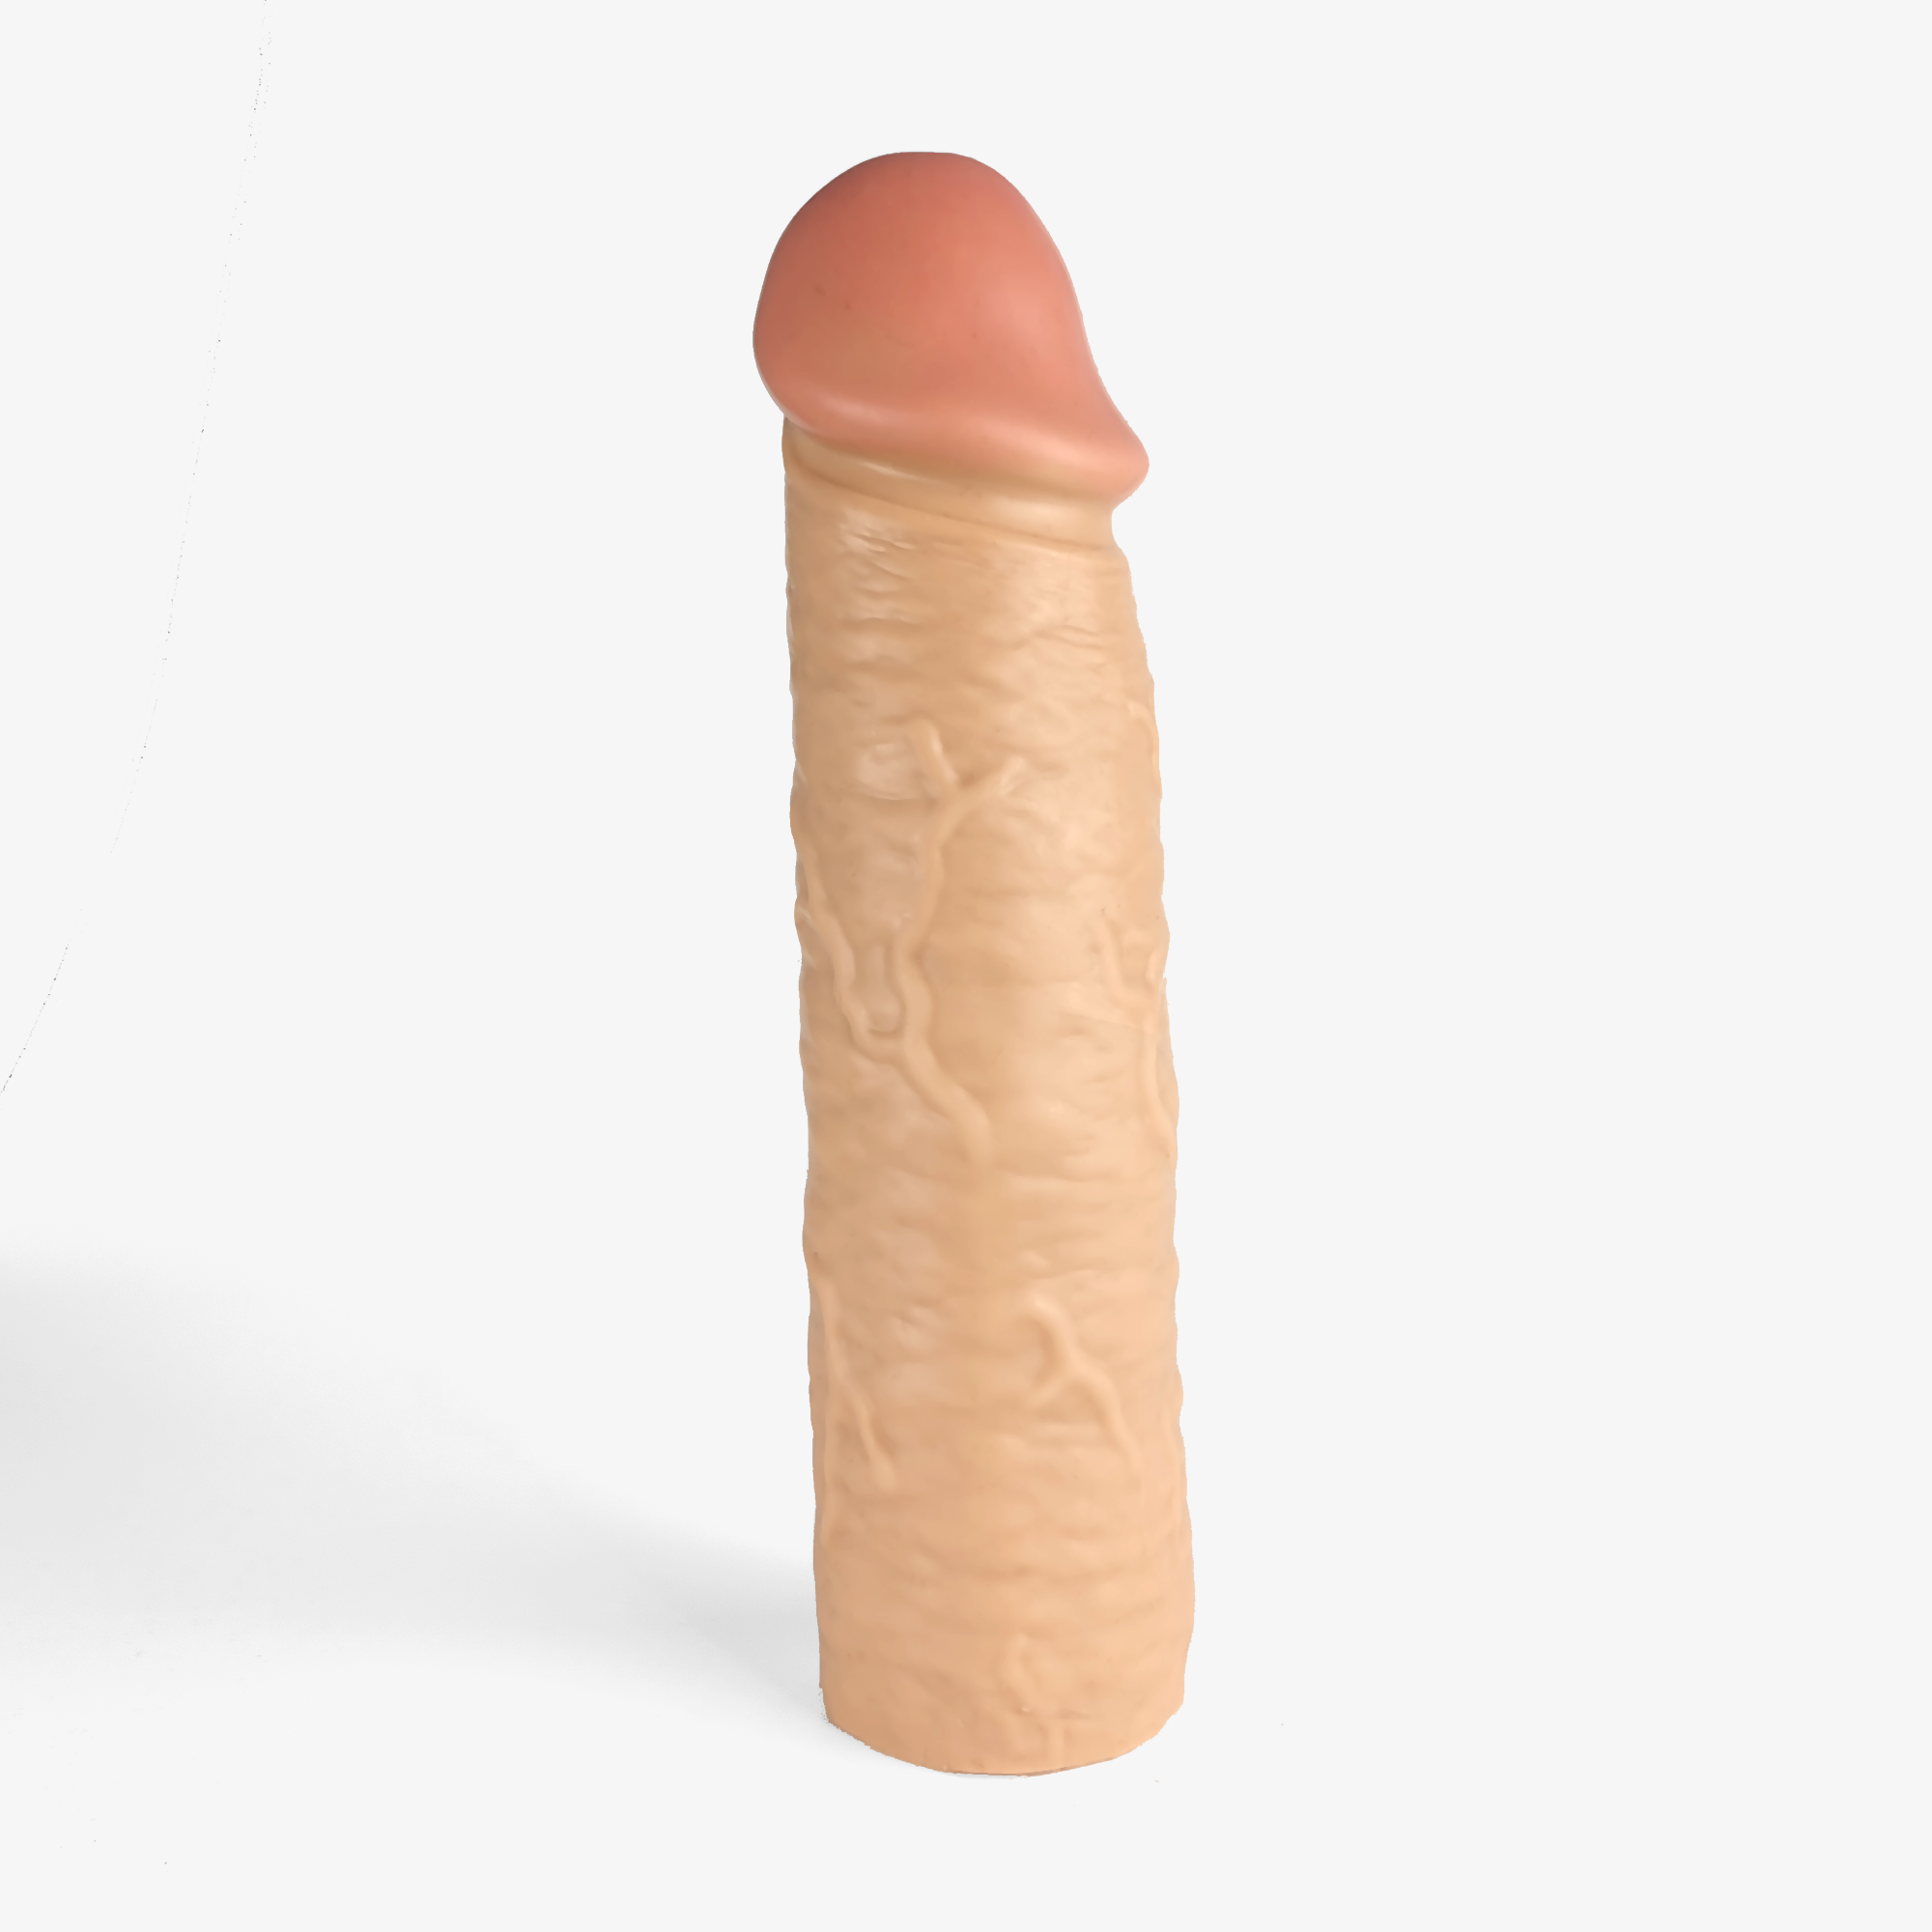 The Made to Measure Penis Extender from Uncover Creations